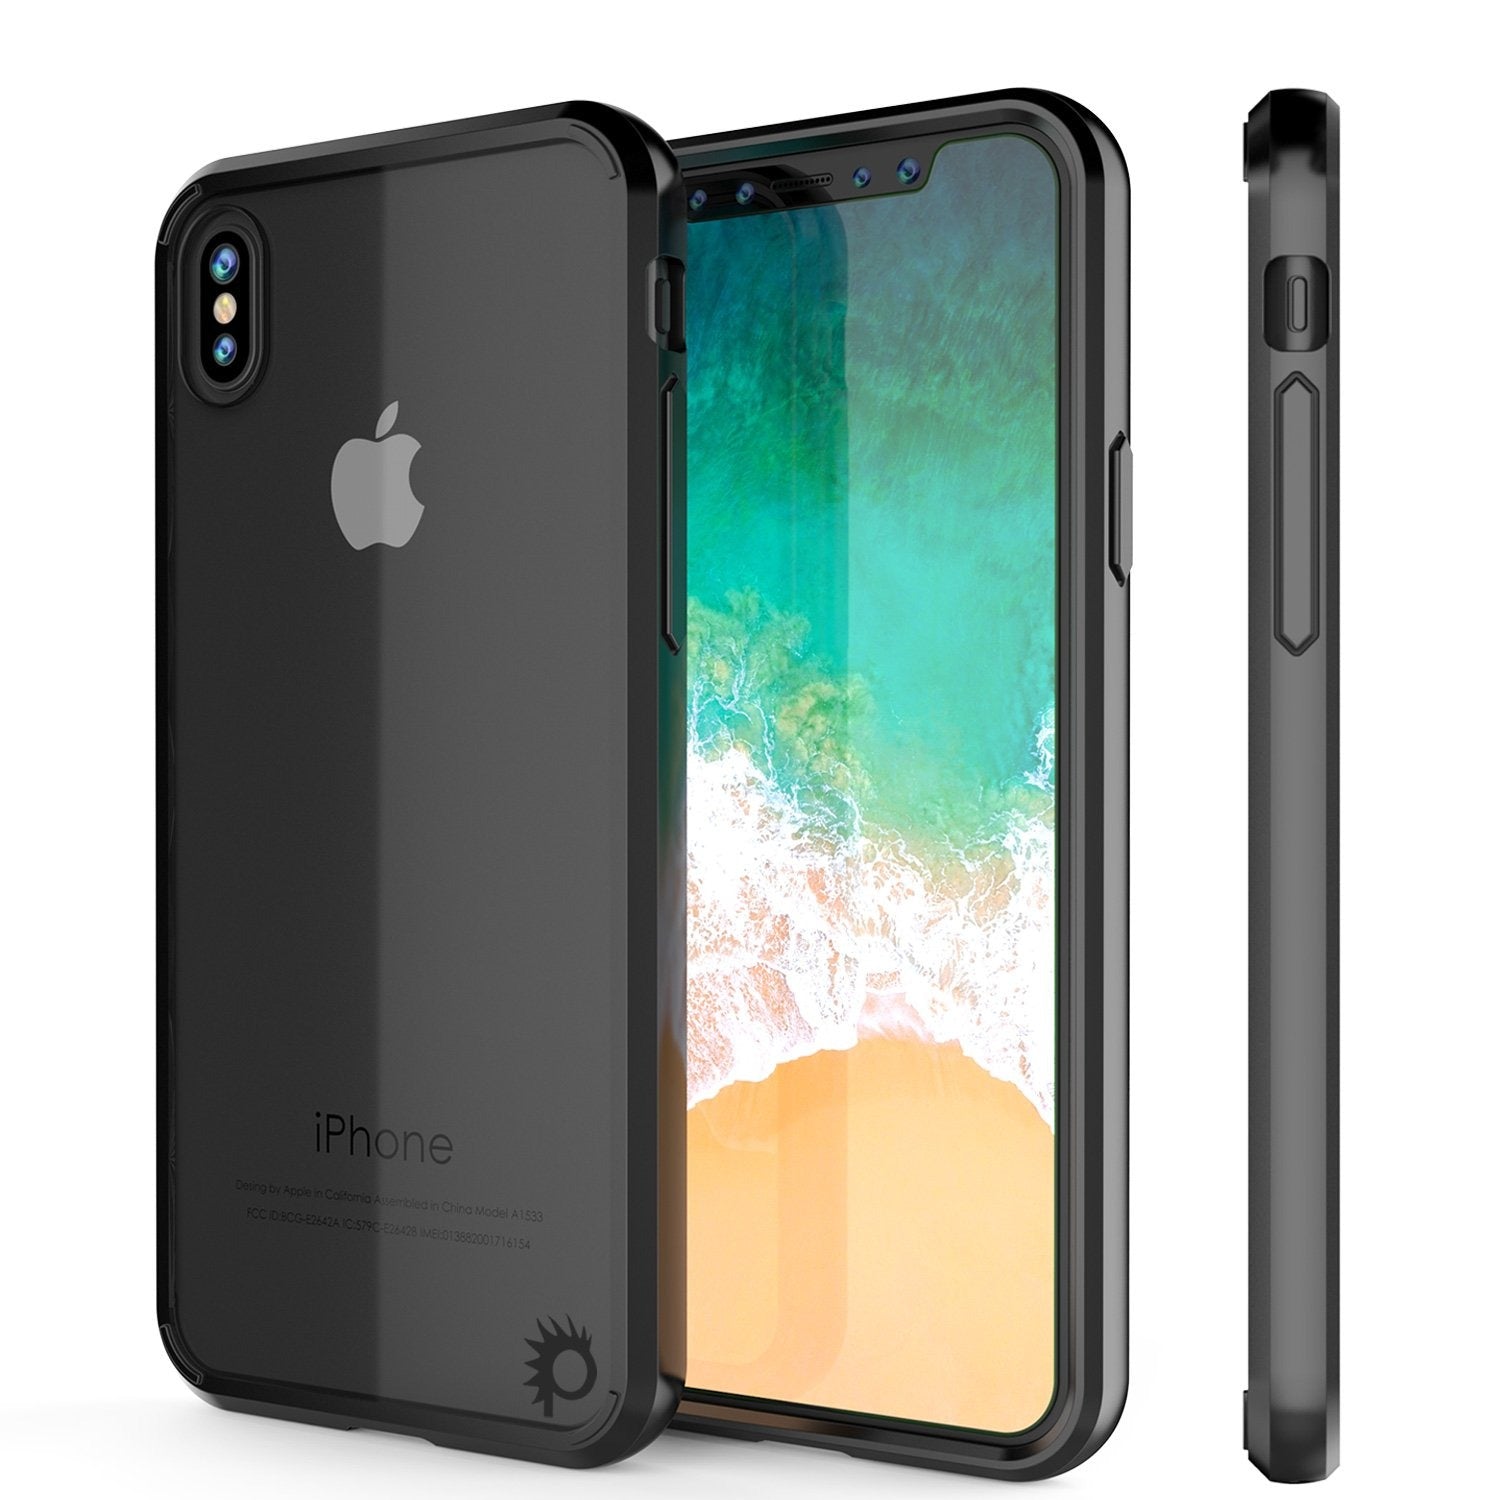 iPhone X Case, PUNKcase [LUCID 2.0 Series] [Slim Fit] Armor Cover W/Integrated Anti-Shock System [Black]